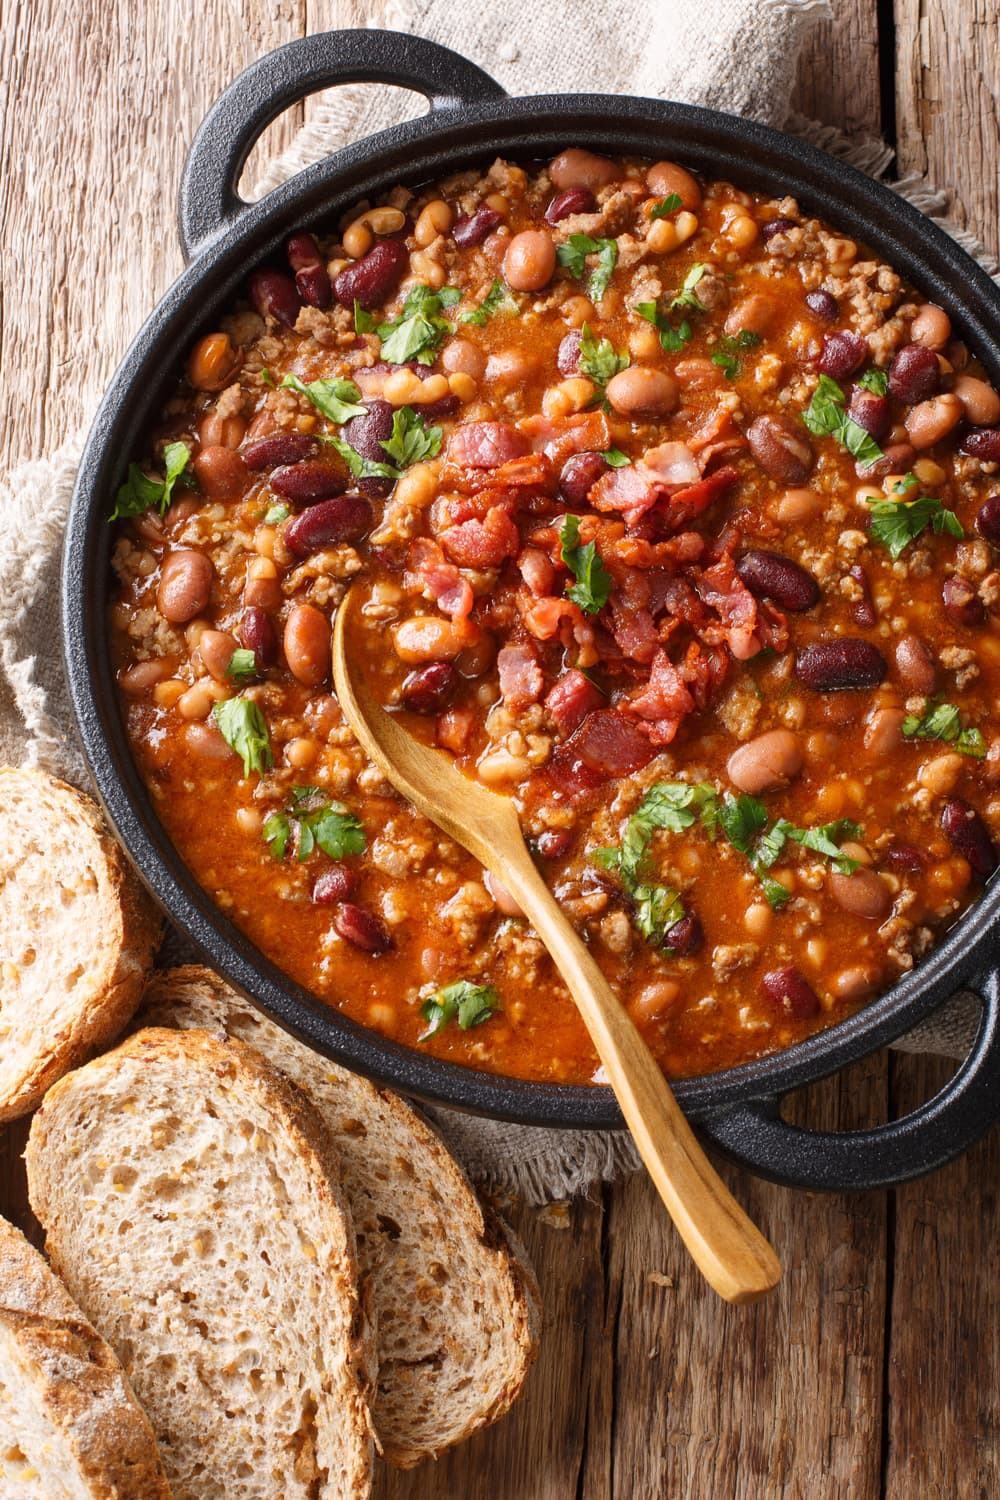 Baked lima and pinto beans with tomato soup base and ground beef on a stone pot garnished with chopped bacon and parsley leaves.